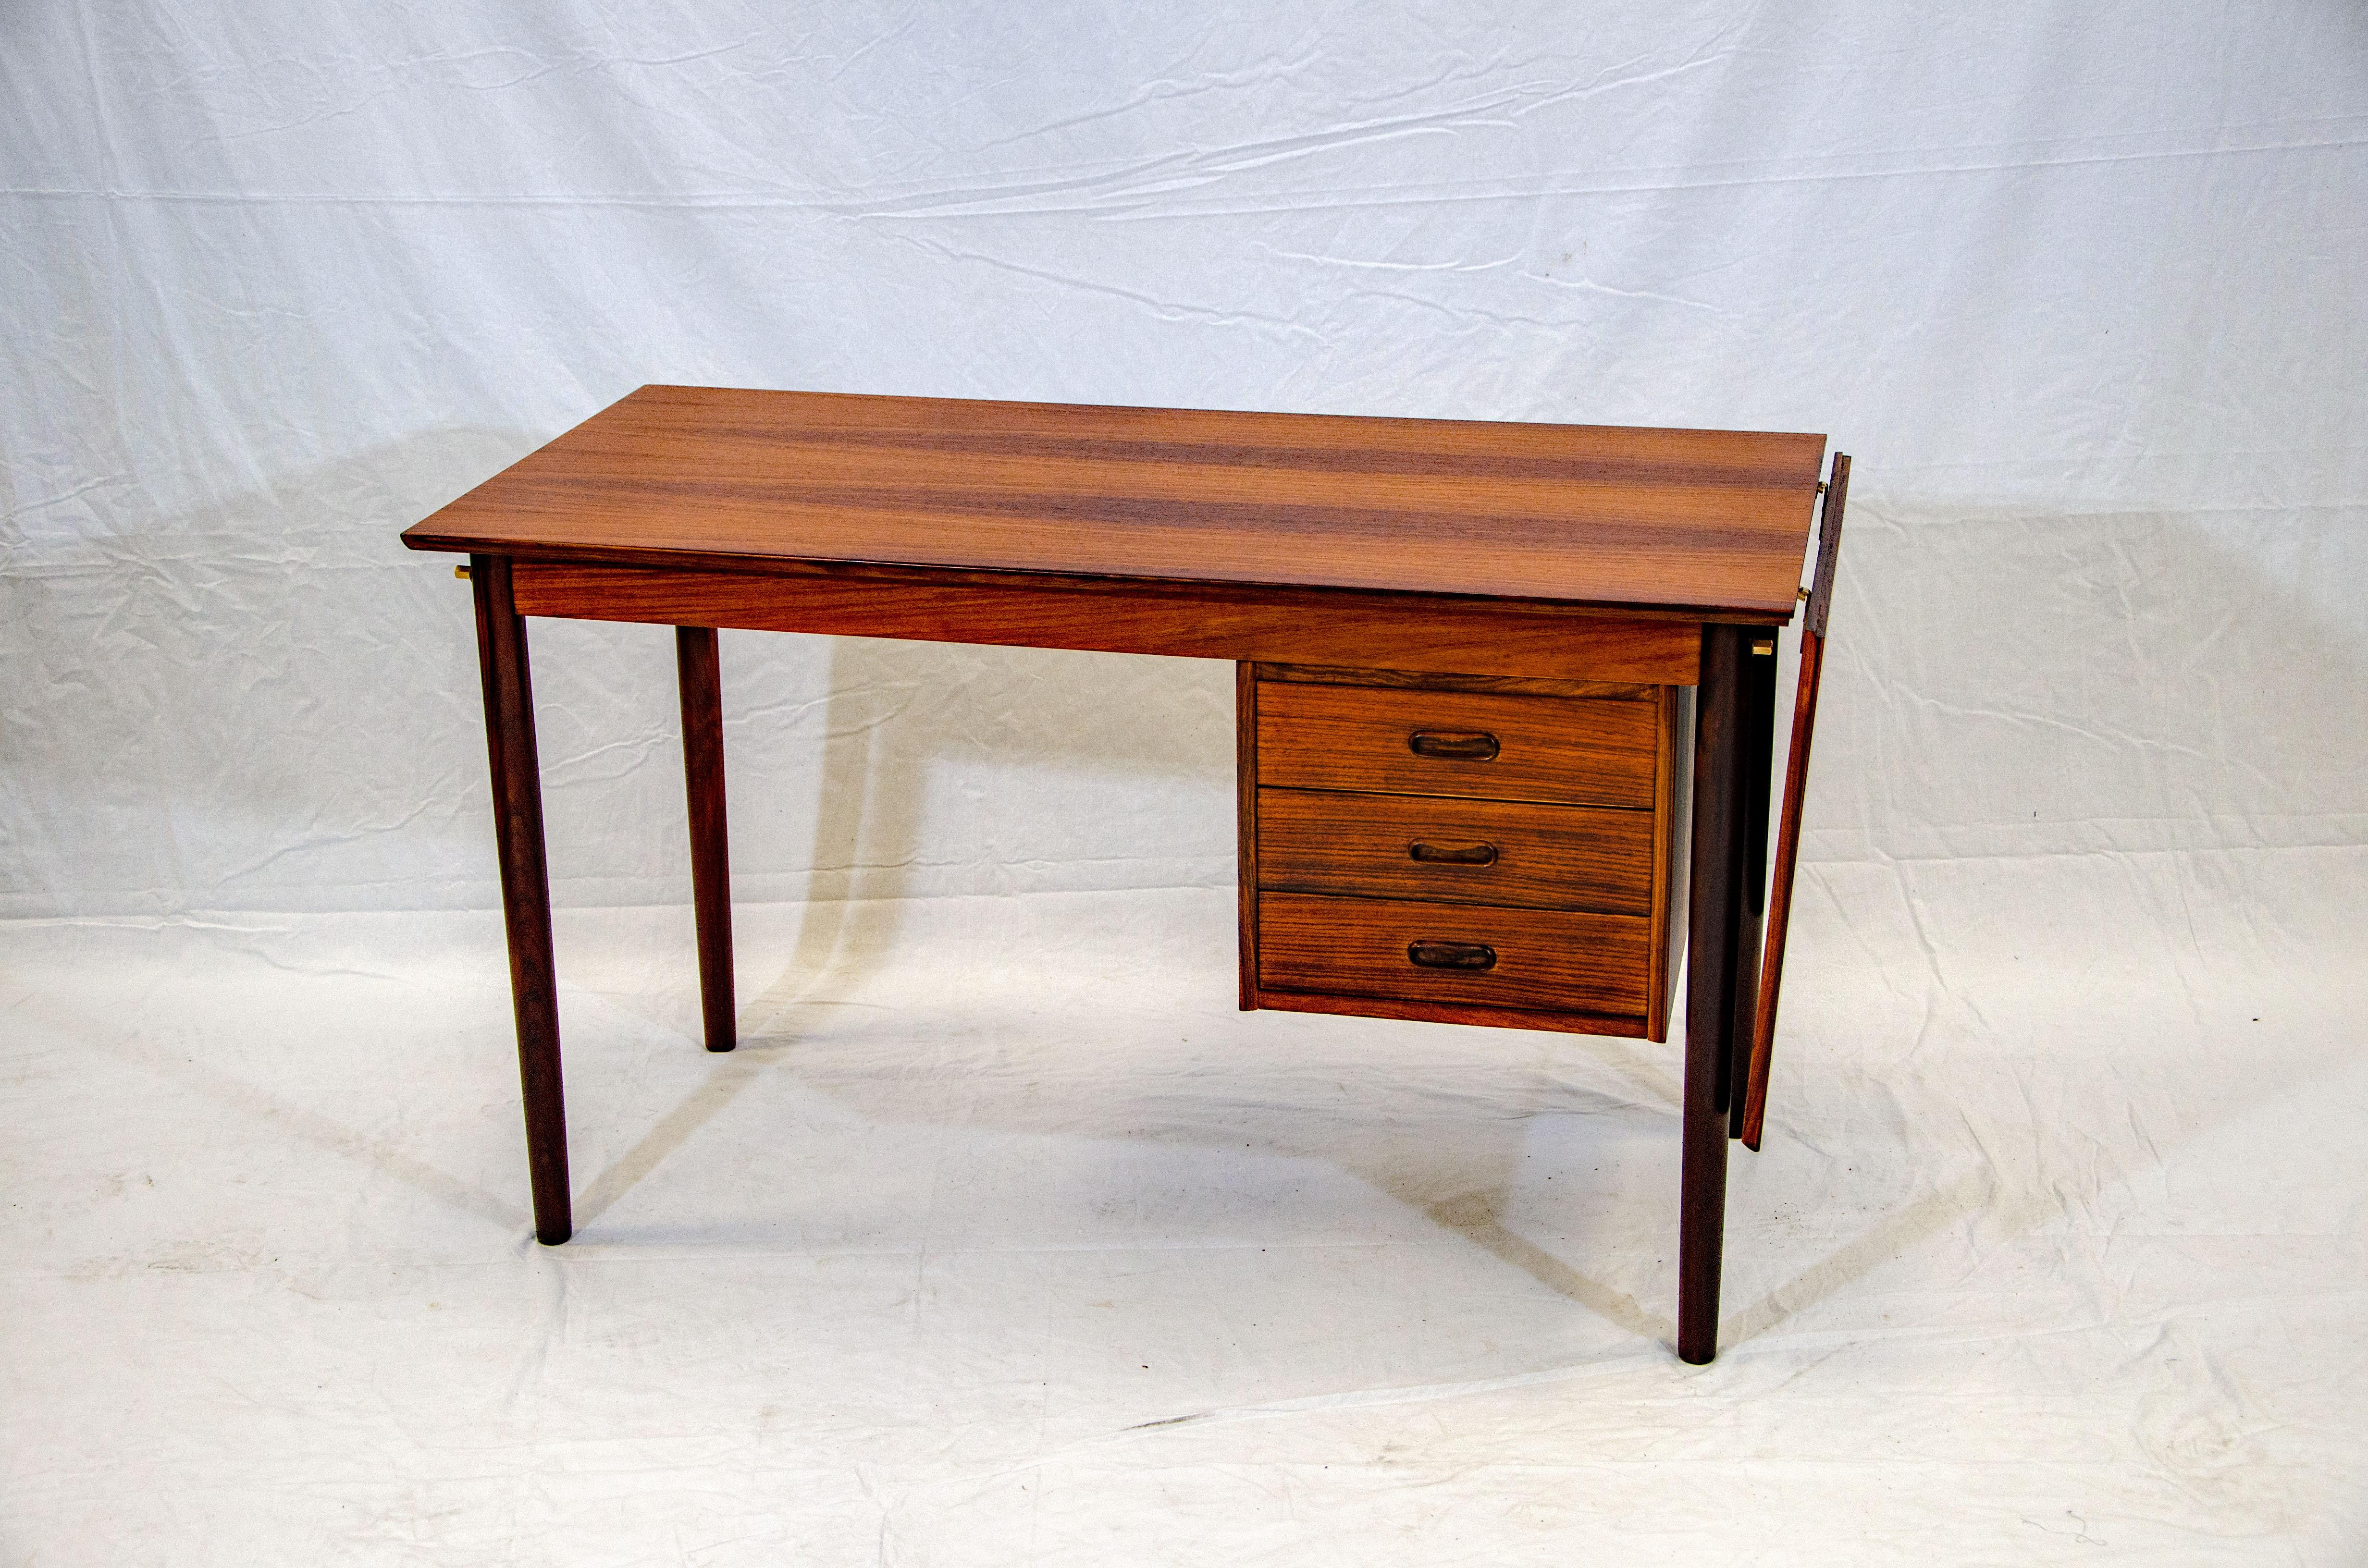 Very nice Danish rosewood desk with book matched grain pattern. The drawer unit can slide from side to side depending on where you want to sit. The hanging extension is 18 1/4